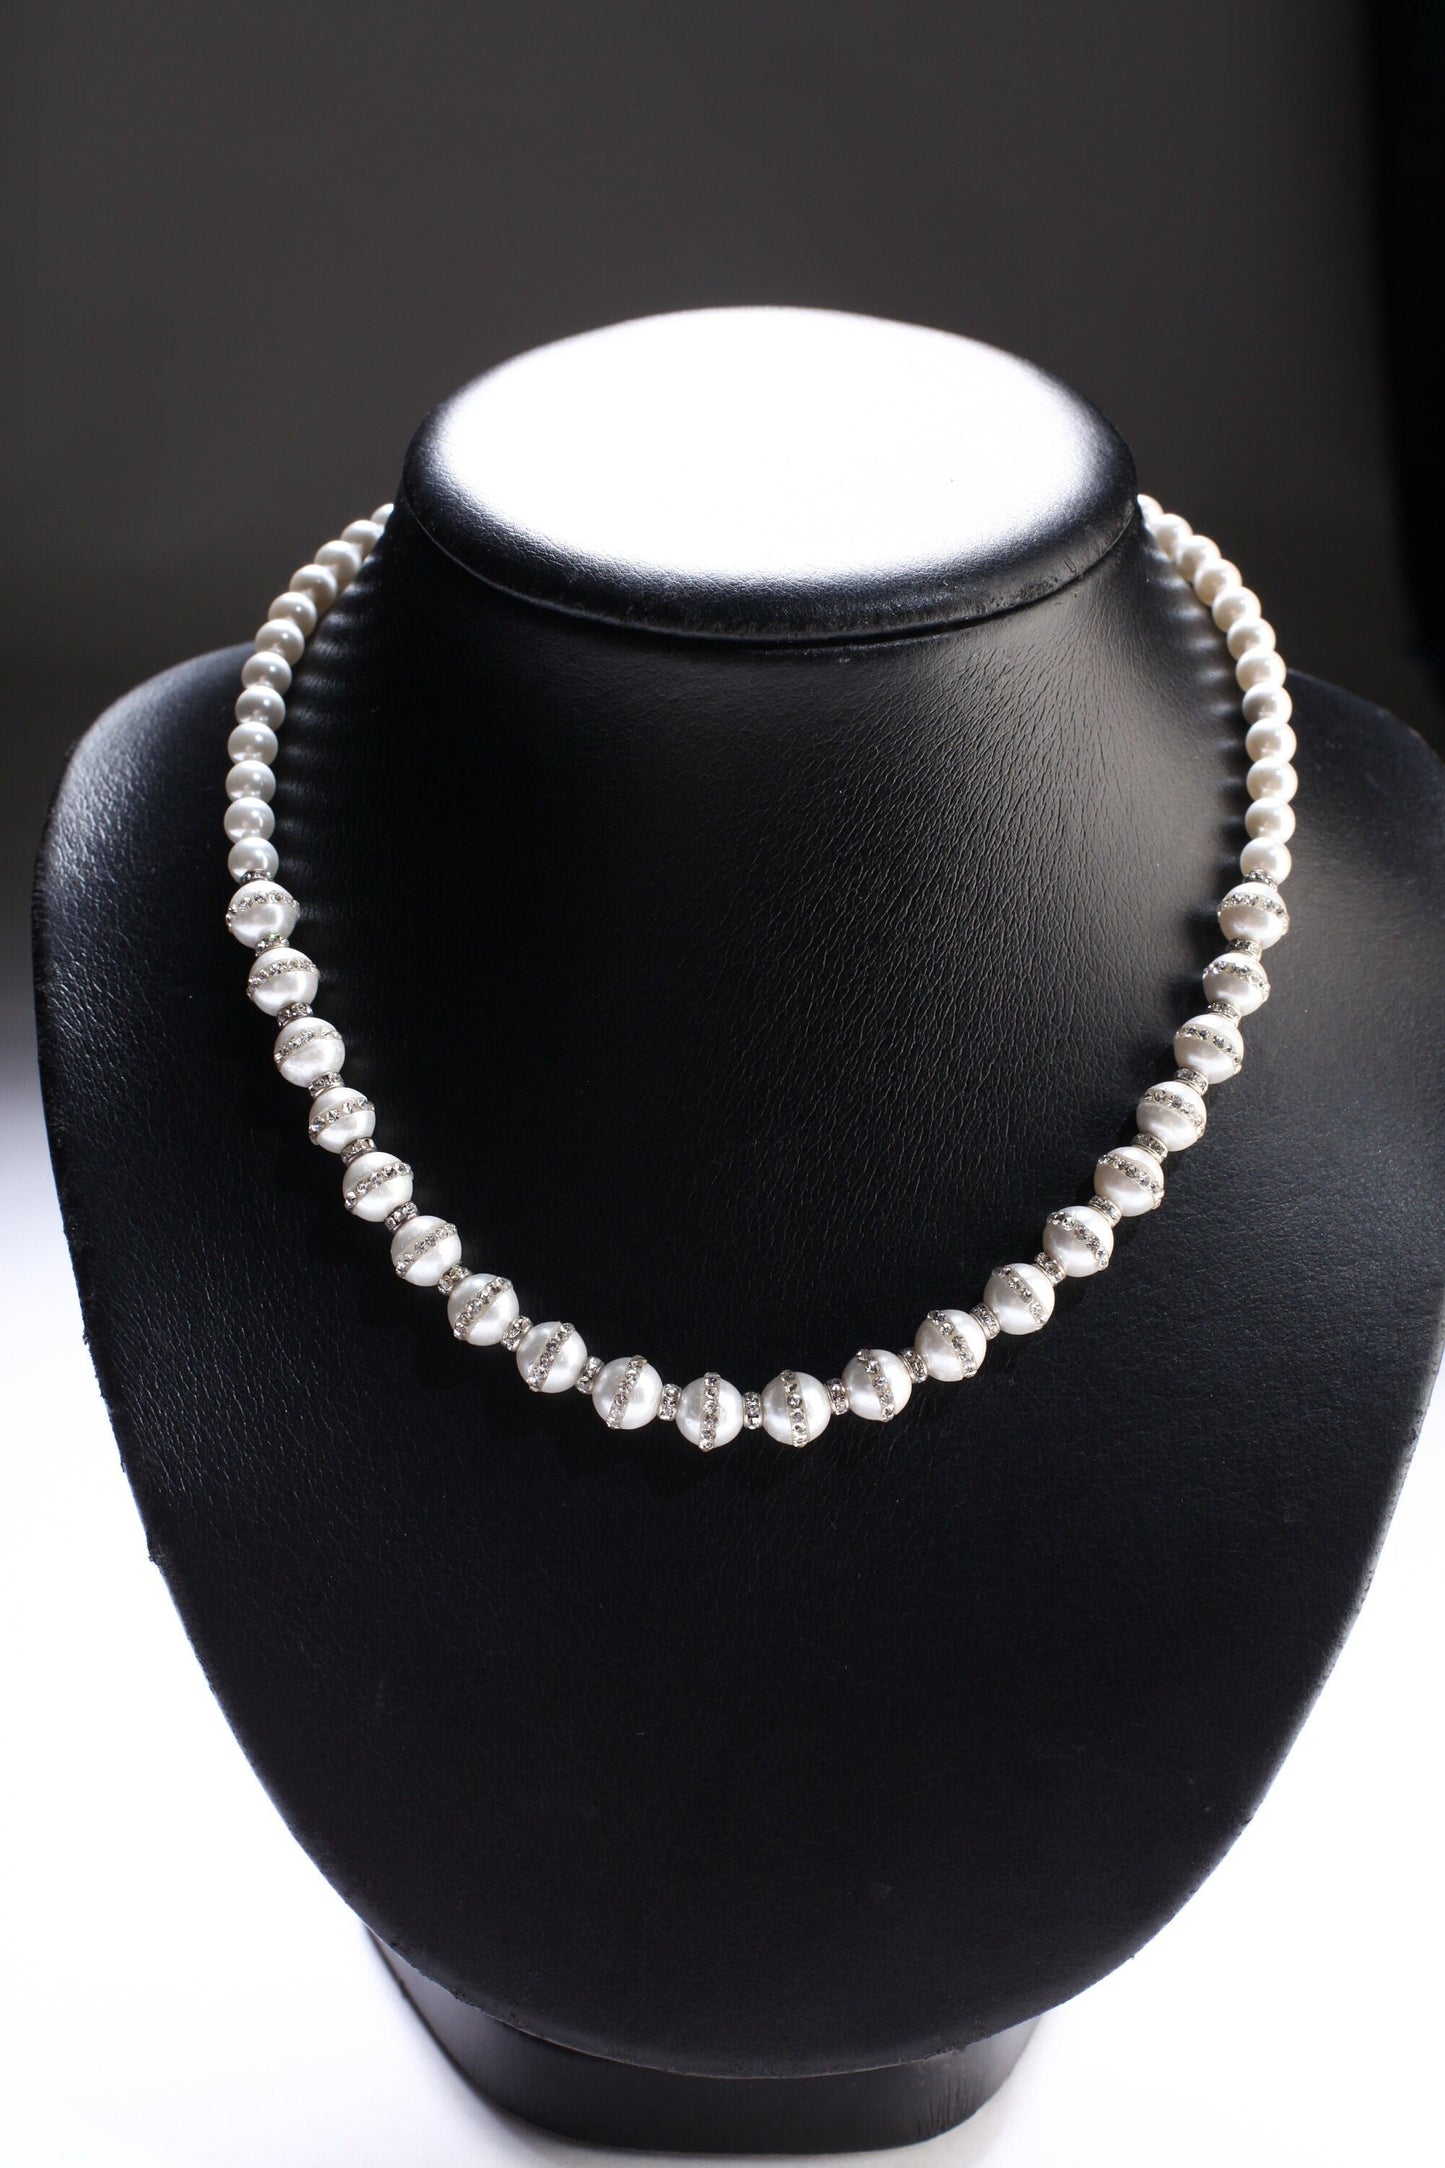 South Sea Shell Pearl Smooth Round and Rhinestone Pearl Beads White Necklace, Bridal with Magnetic Closure, Gift for Her